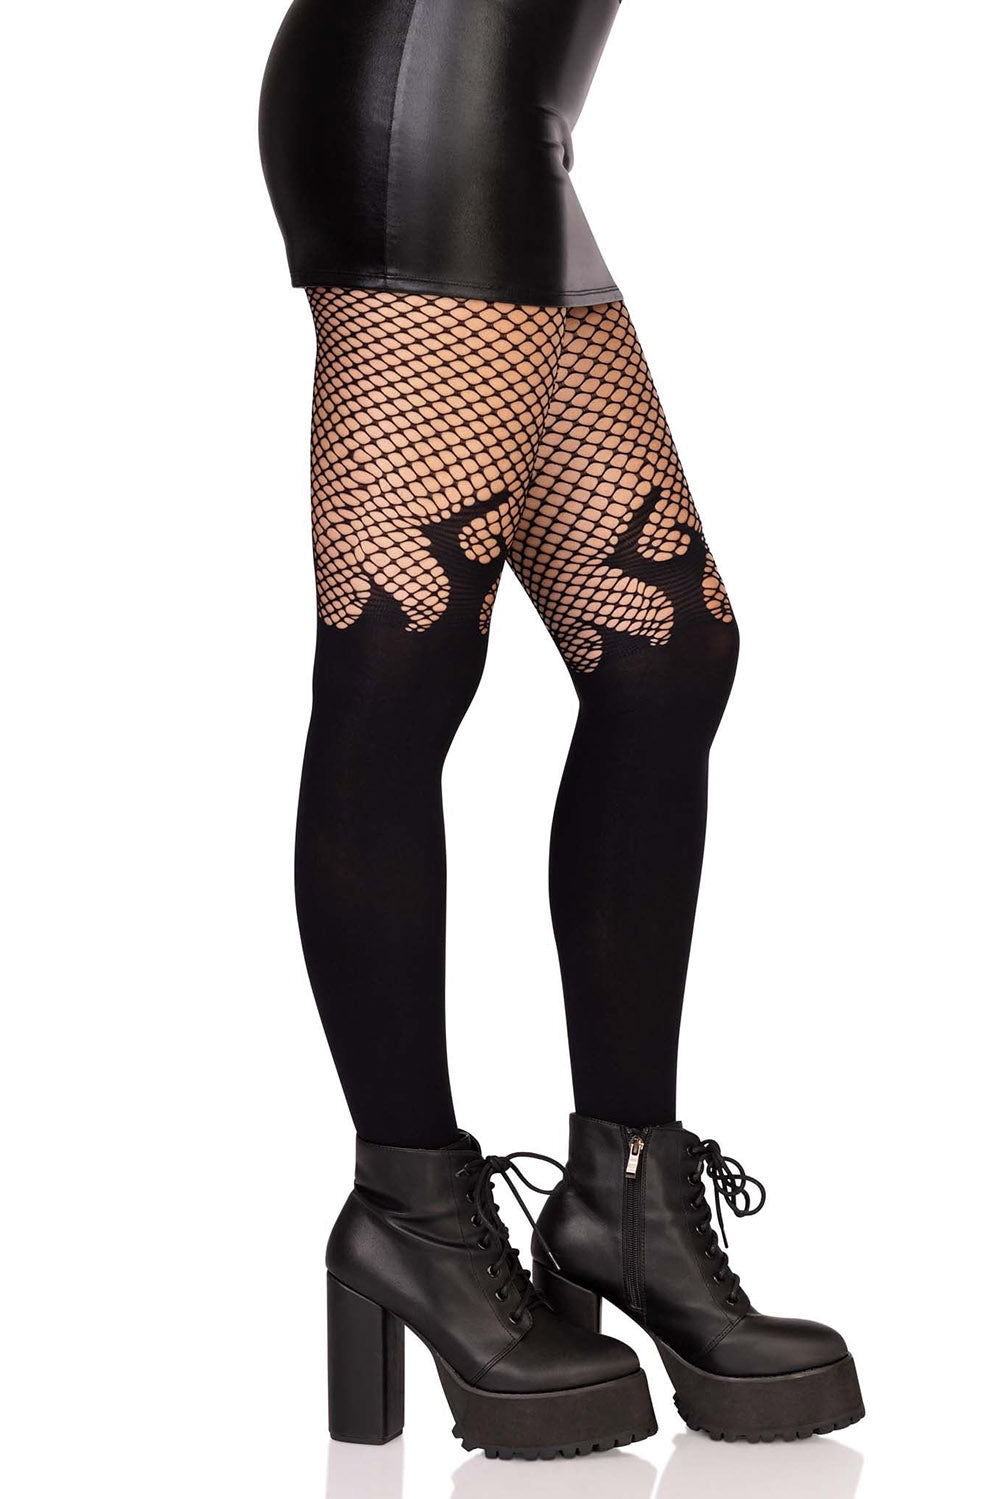 Black Flame Net Plus Size Tights